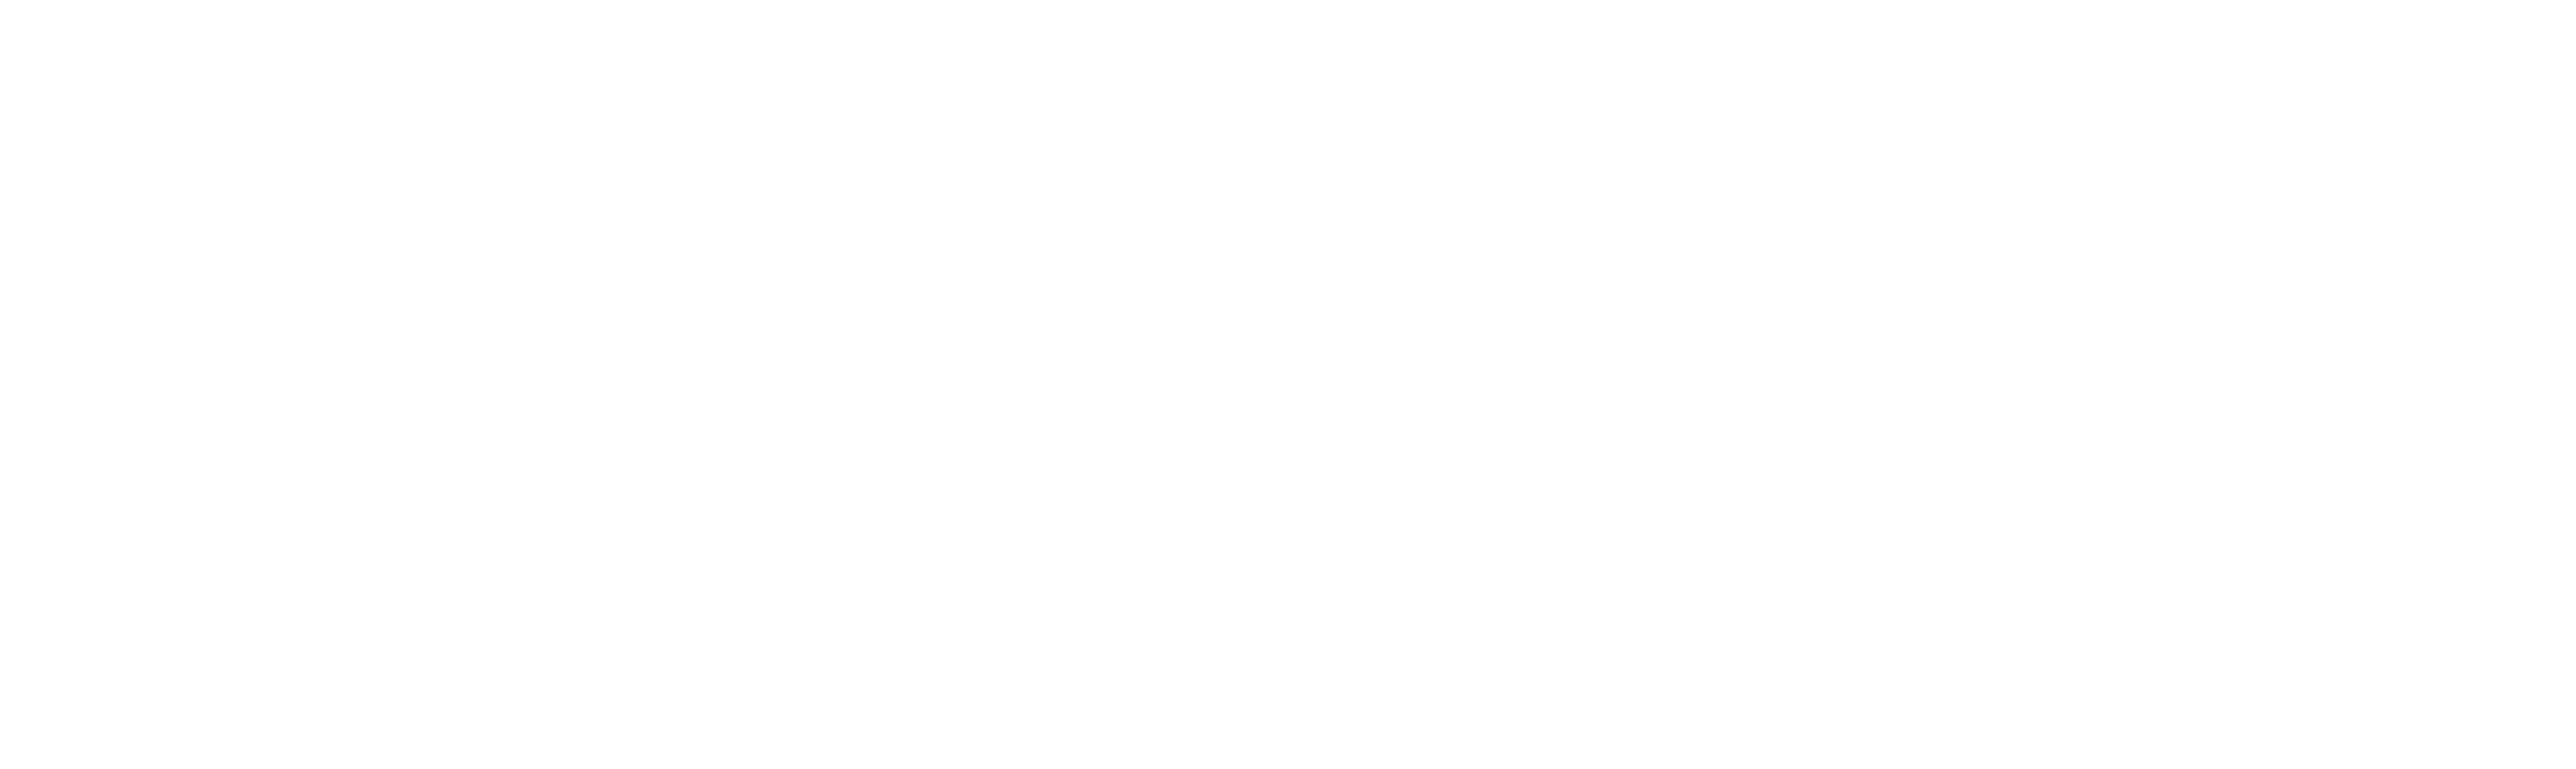 Reeves and Sons